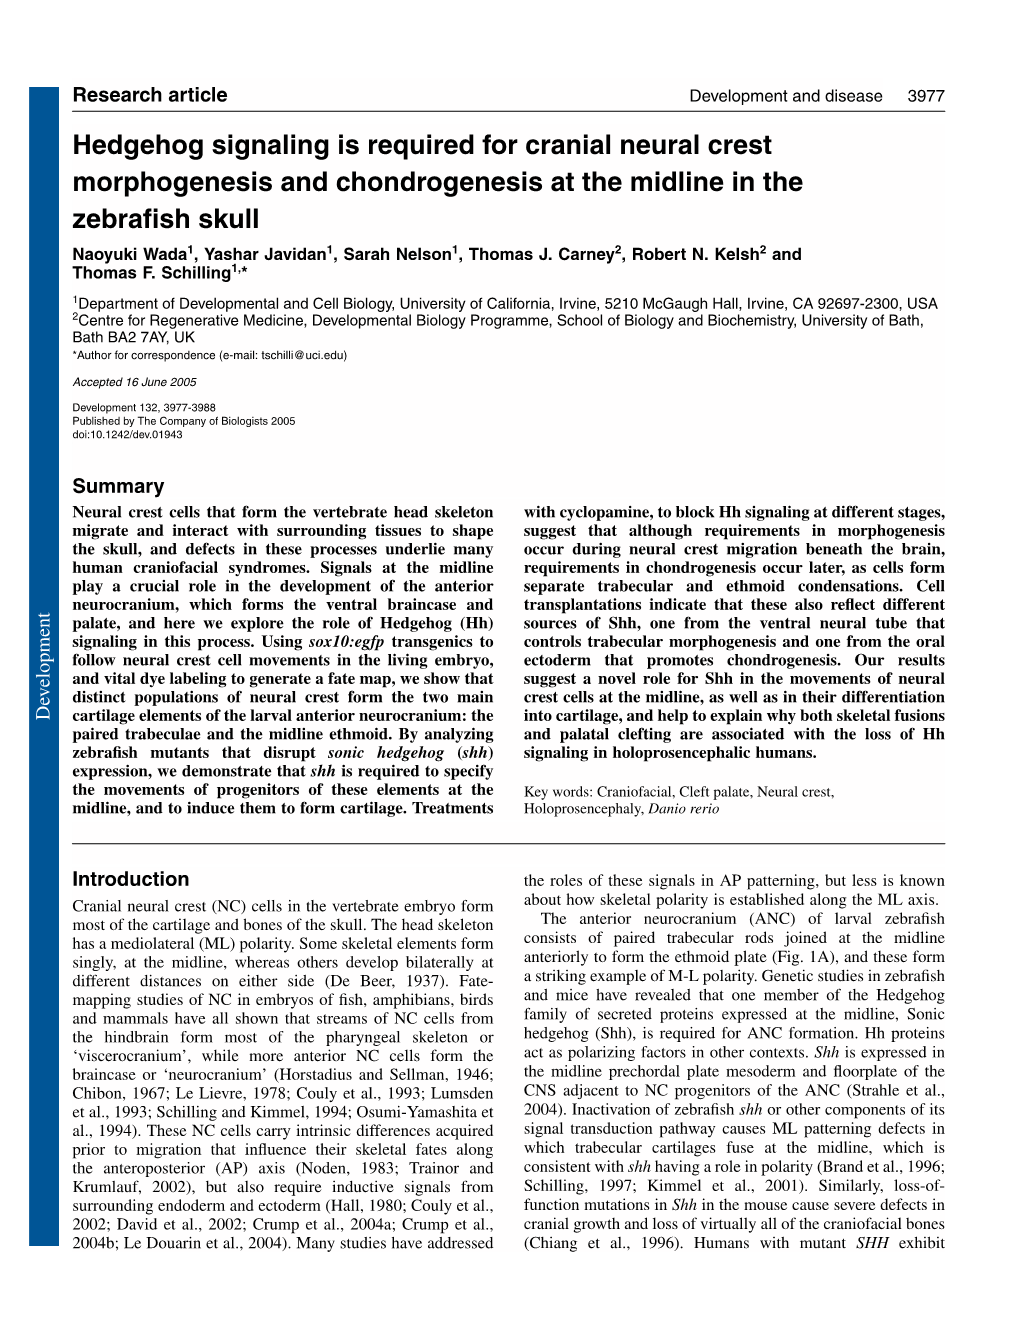 Hedgehog Signaling Is Required for Cranial Neural Crest Morphogenesis